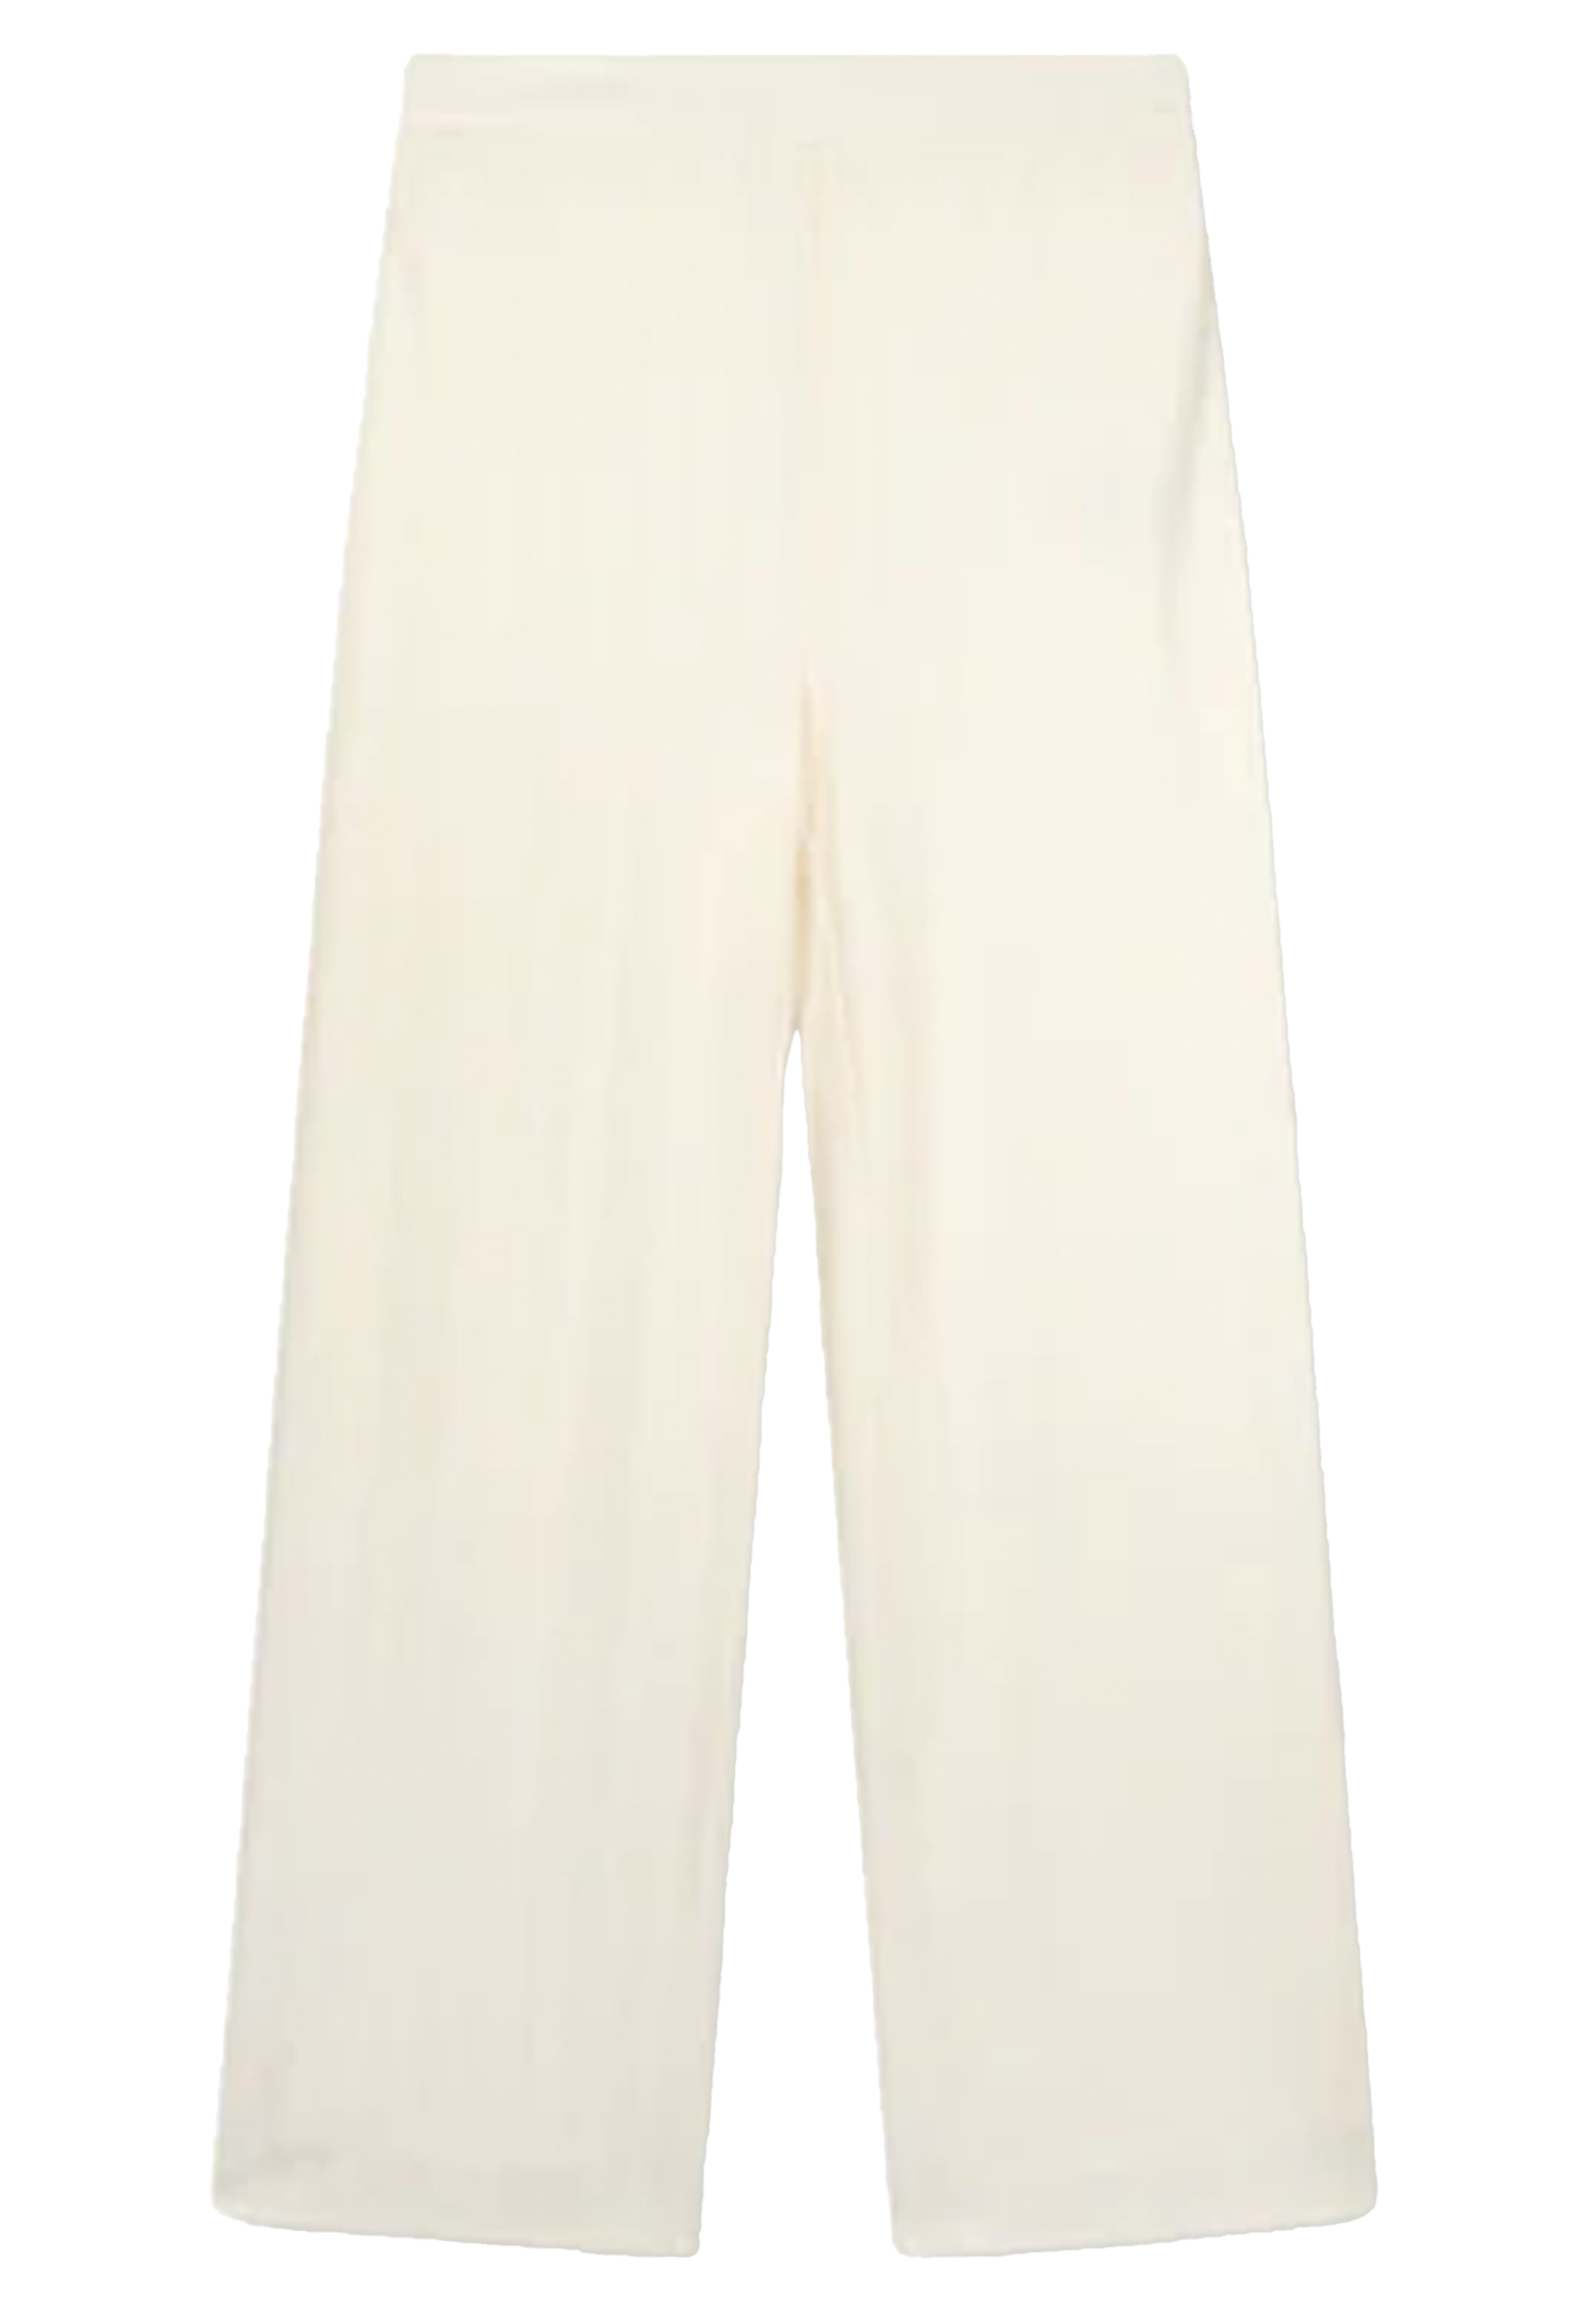 Refined Department Structured Pants NOVA Creamy White - Maat S